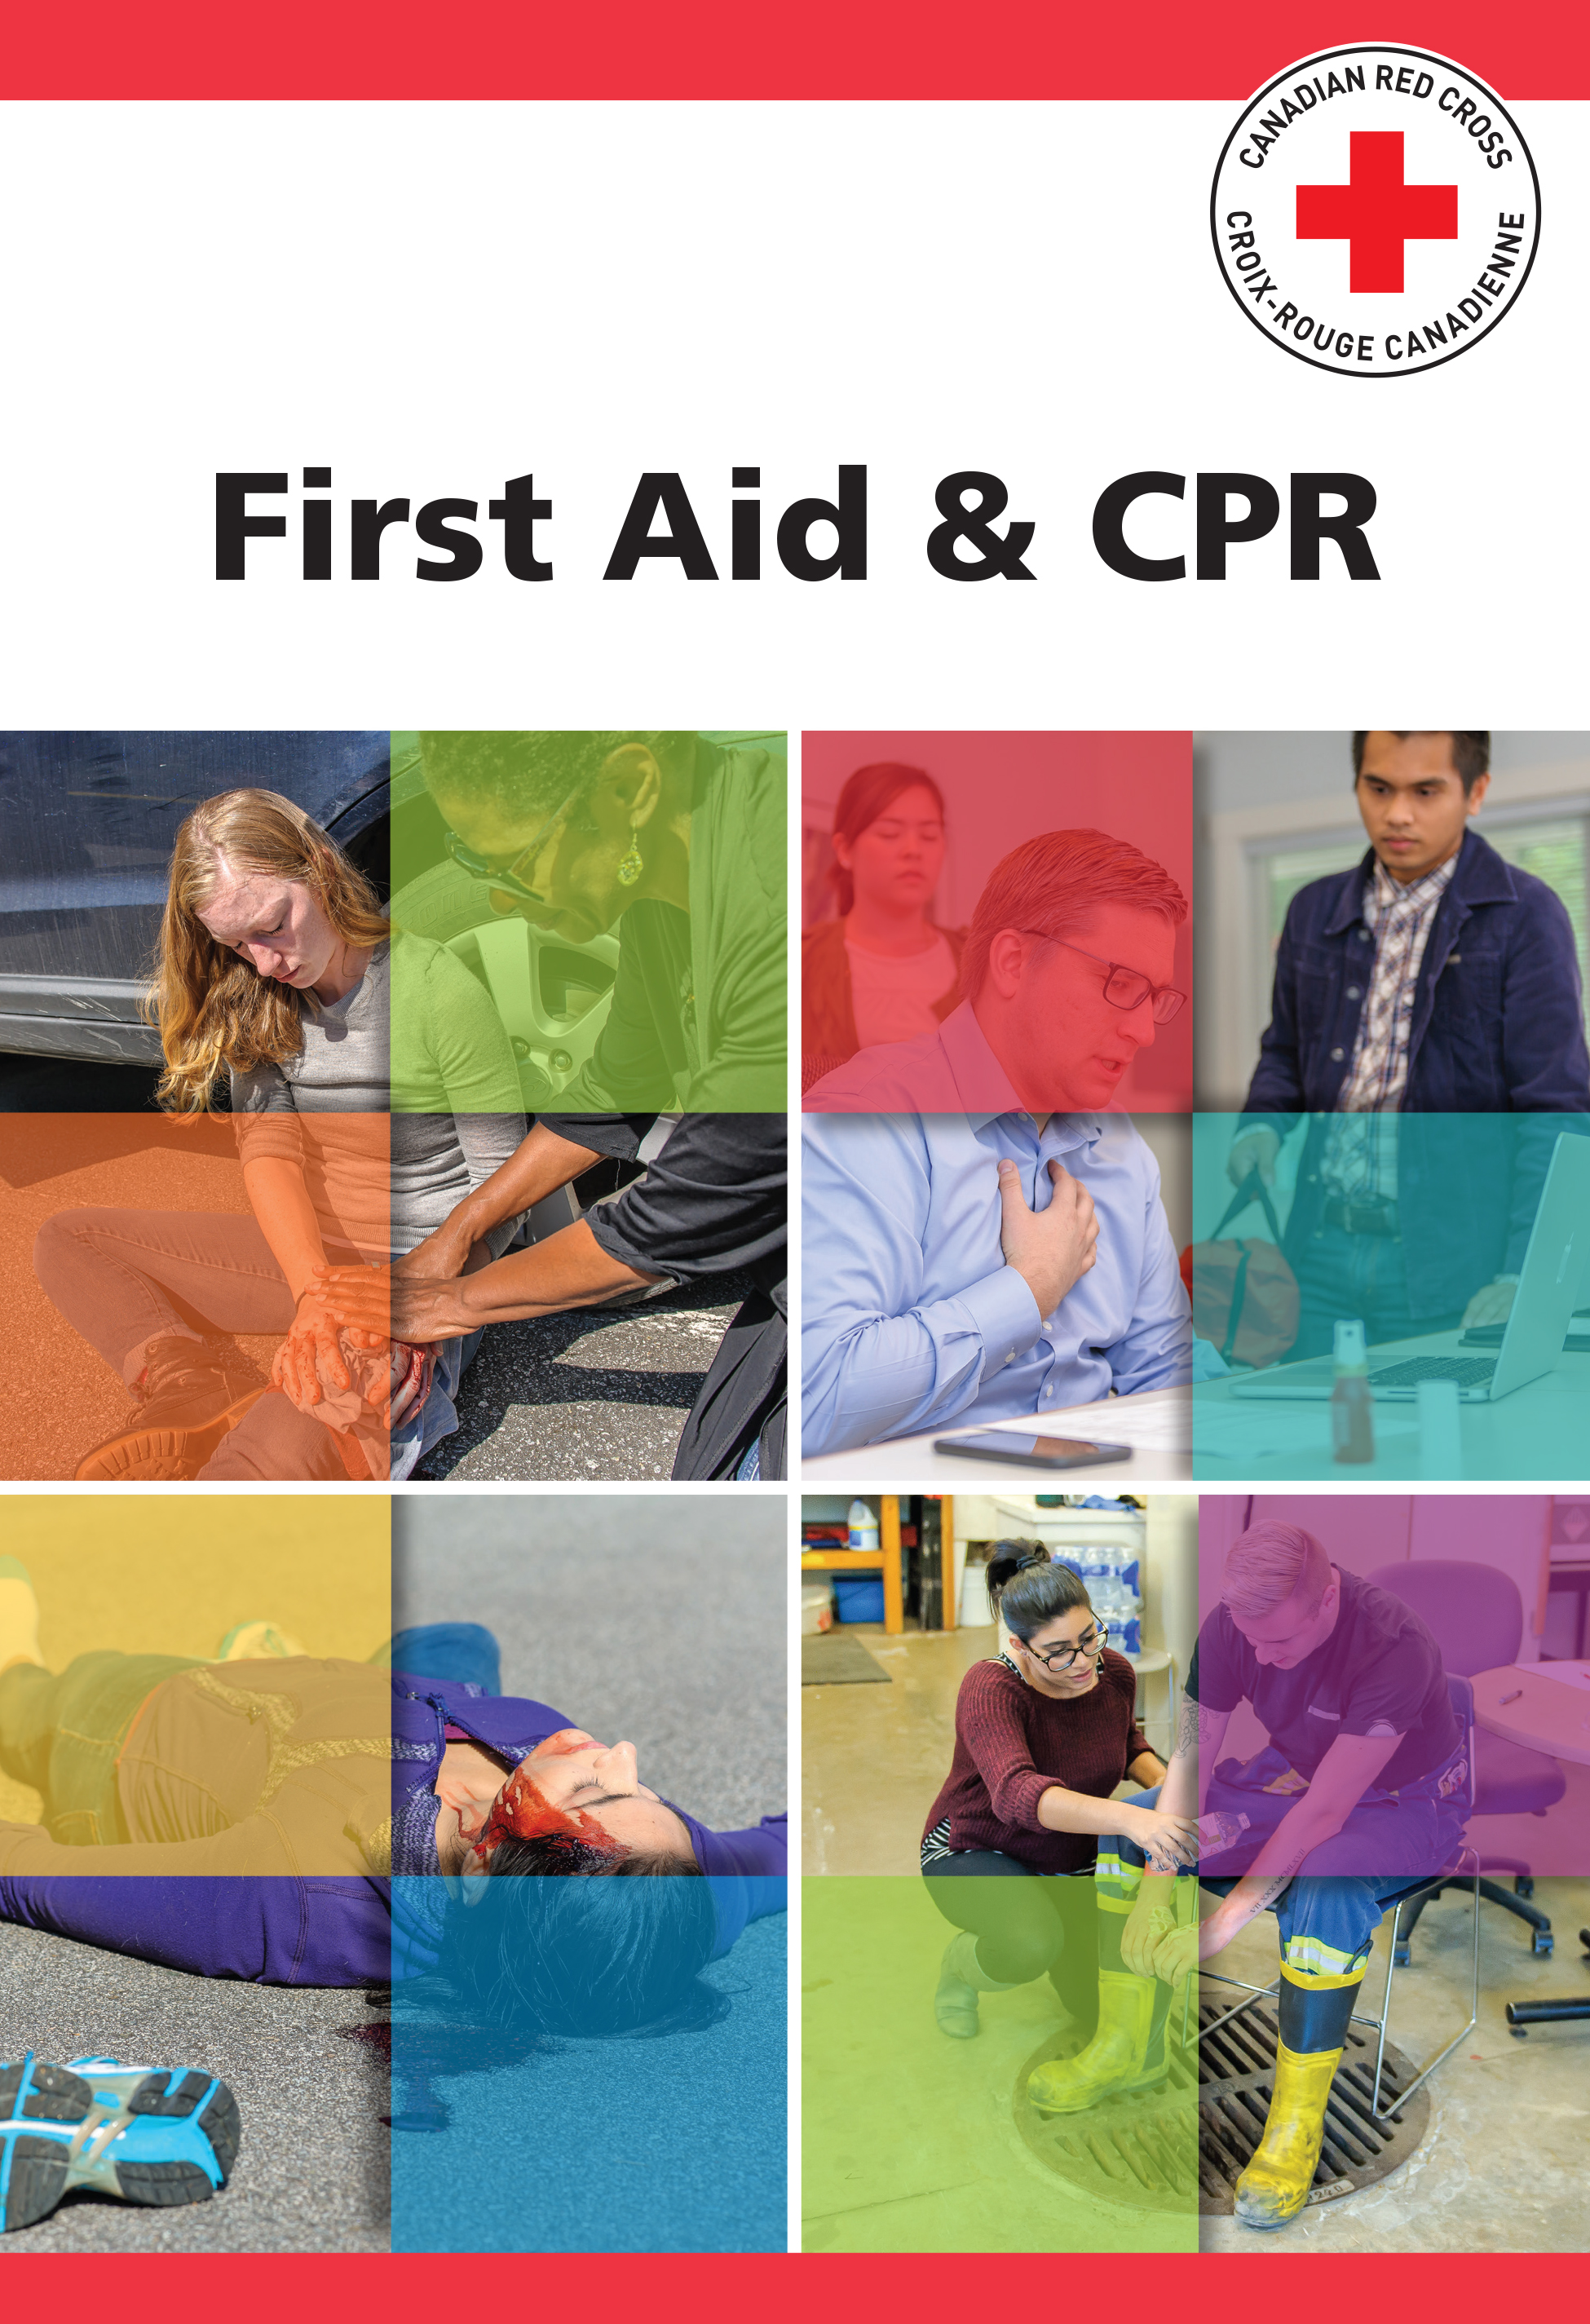 First Aid Course Materials for Marine Basic First Aid and CPR Level C (Blended) in Duncan